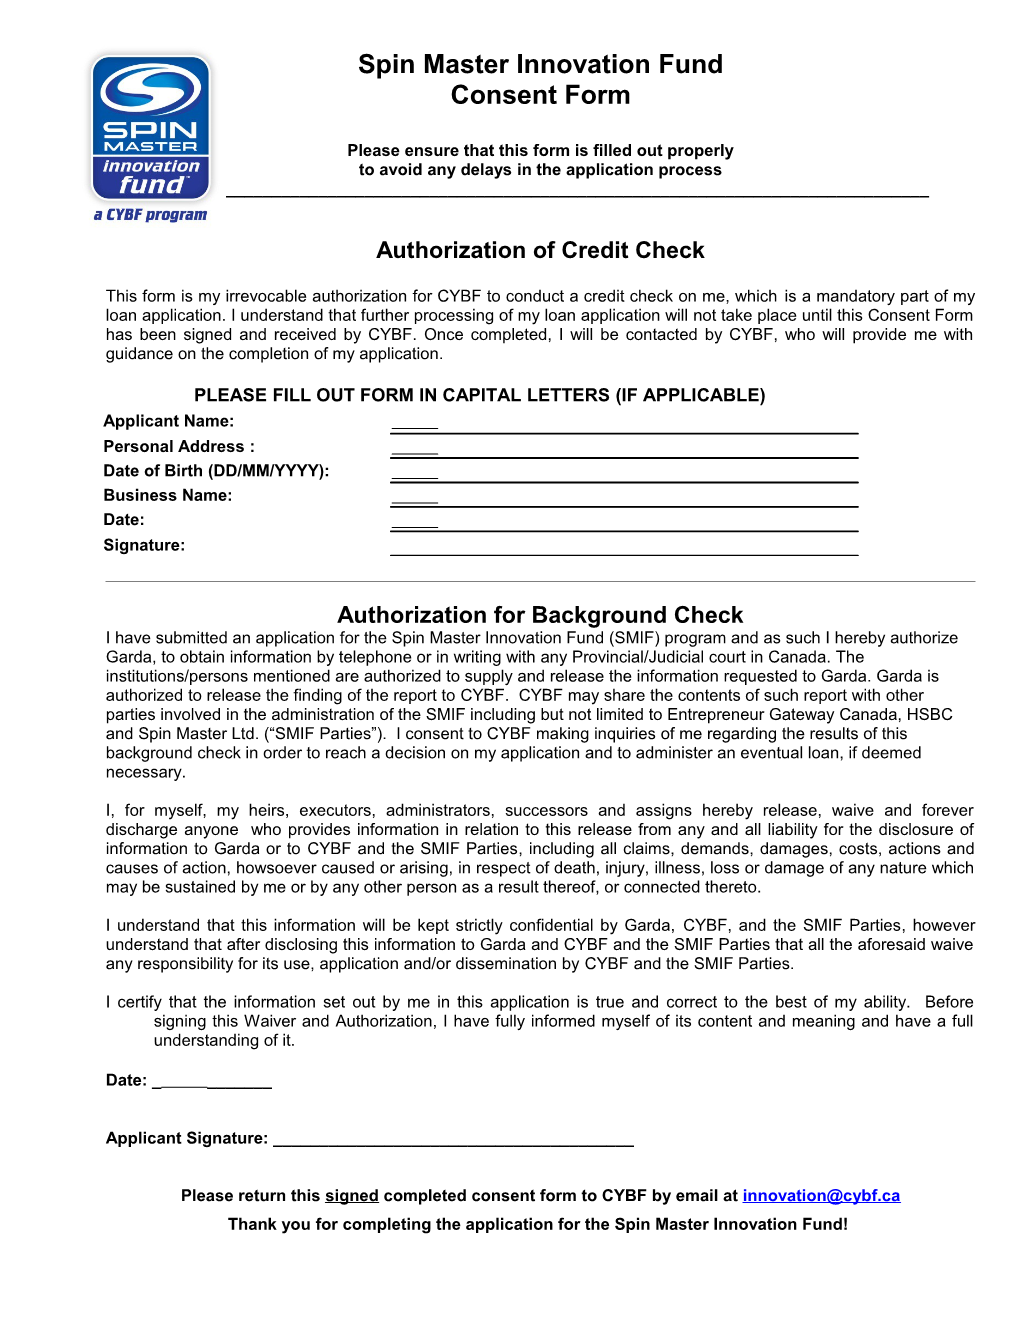 Consent Form Authorization of Credit Check